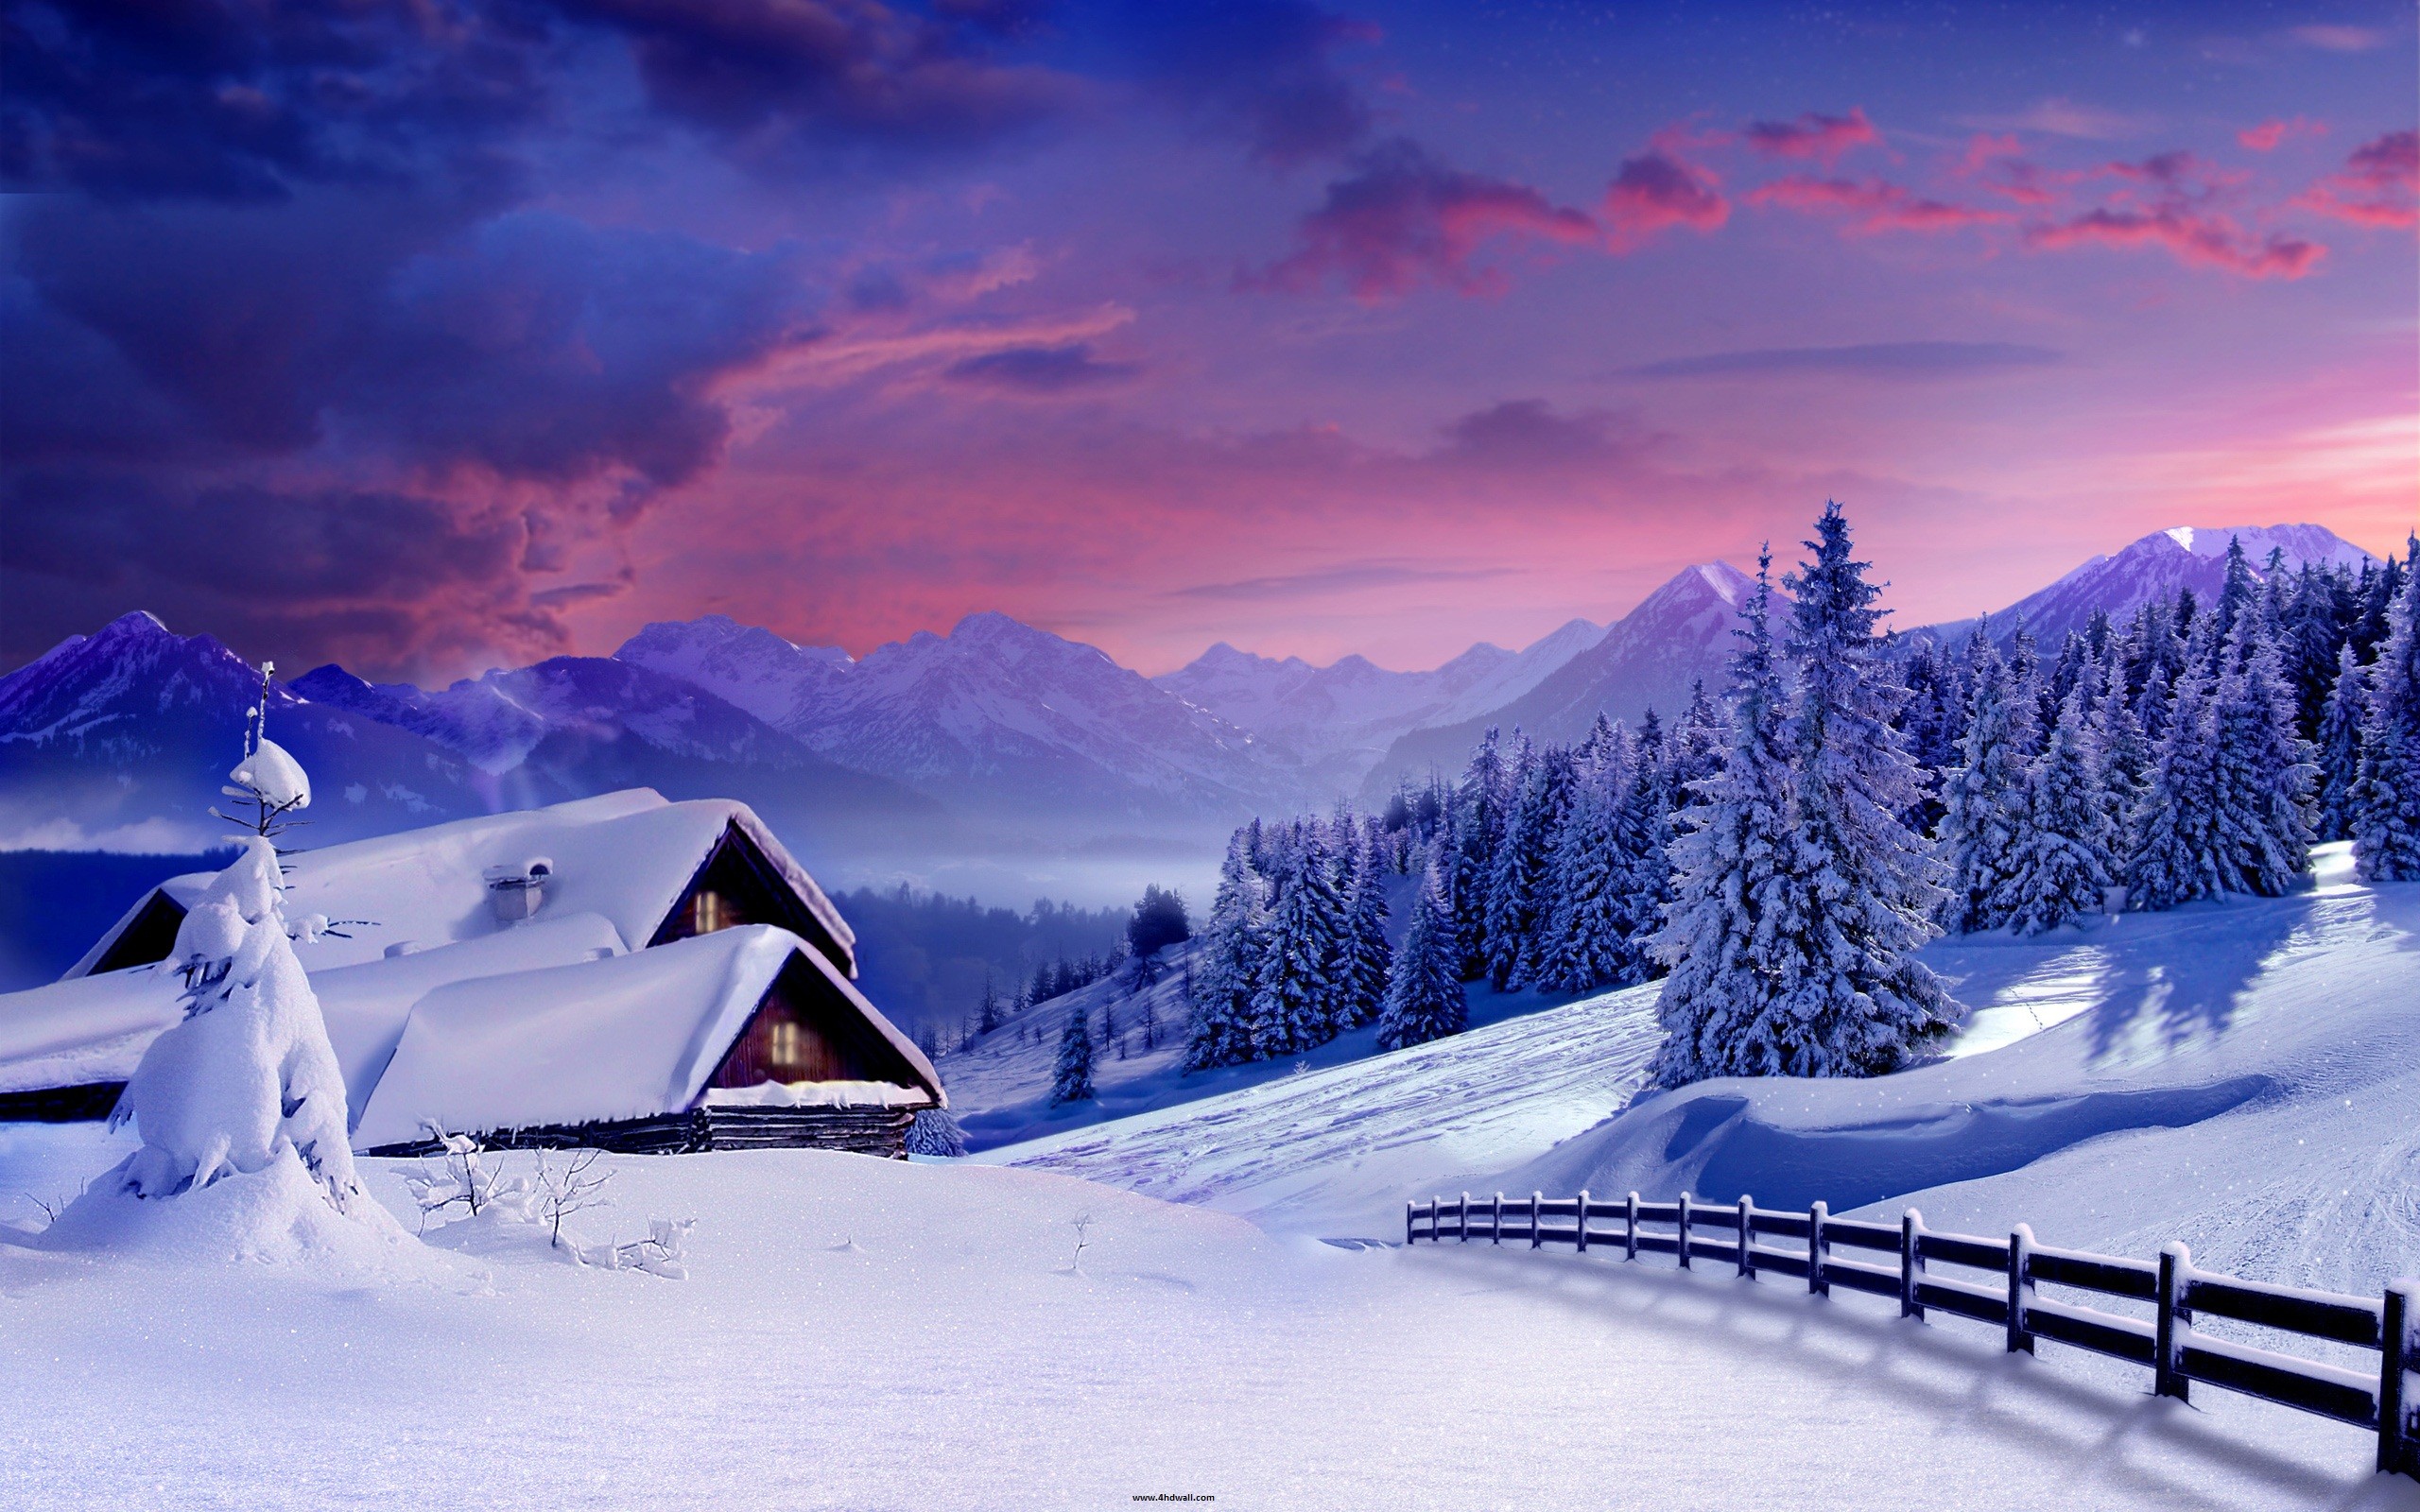  Winter wallpaper HD    Download free awesome full HD  